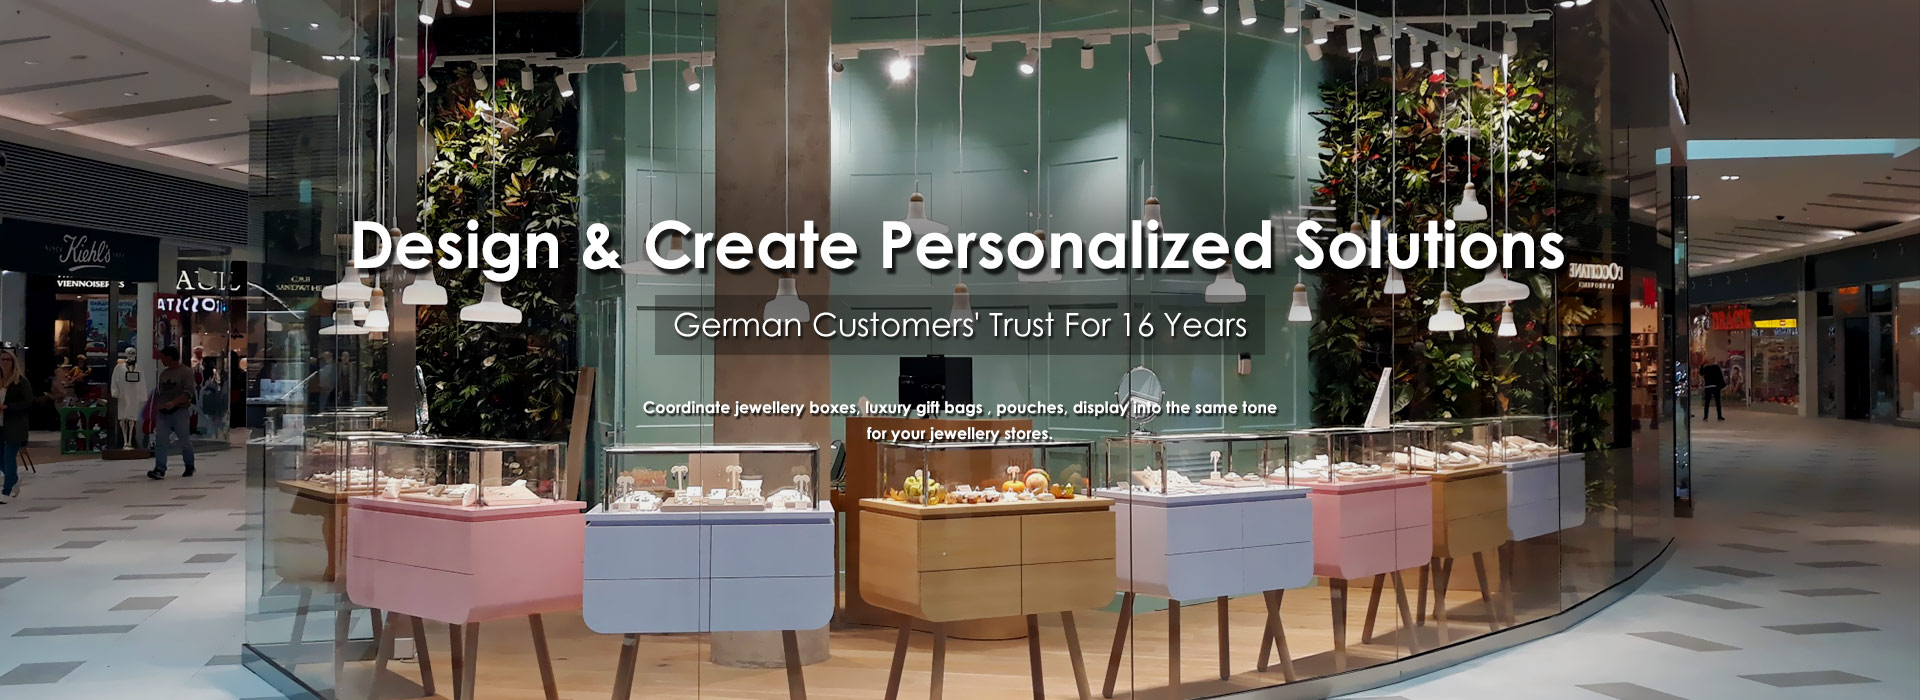 Design & Create Personalized Solutions